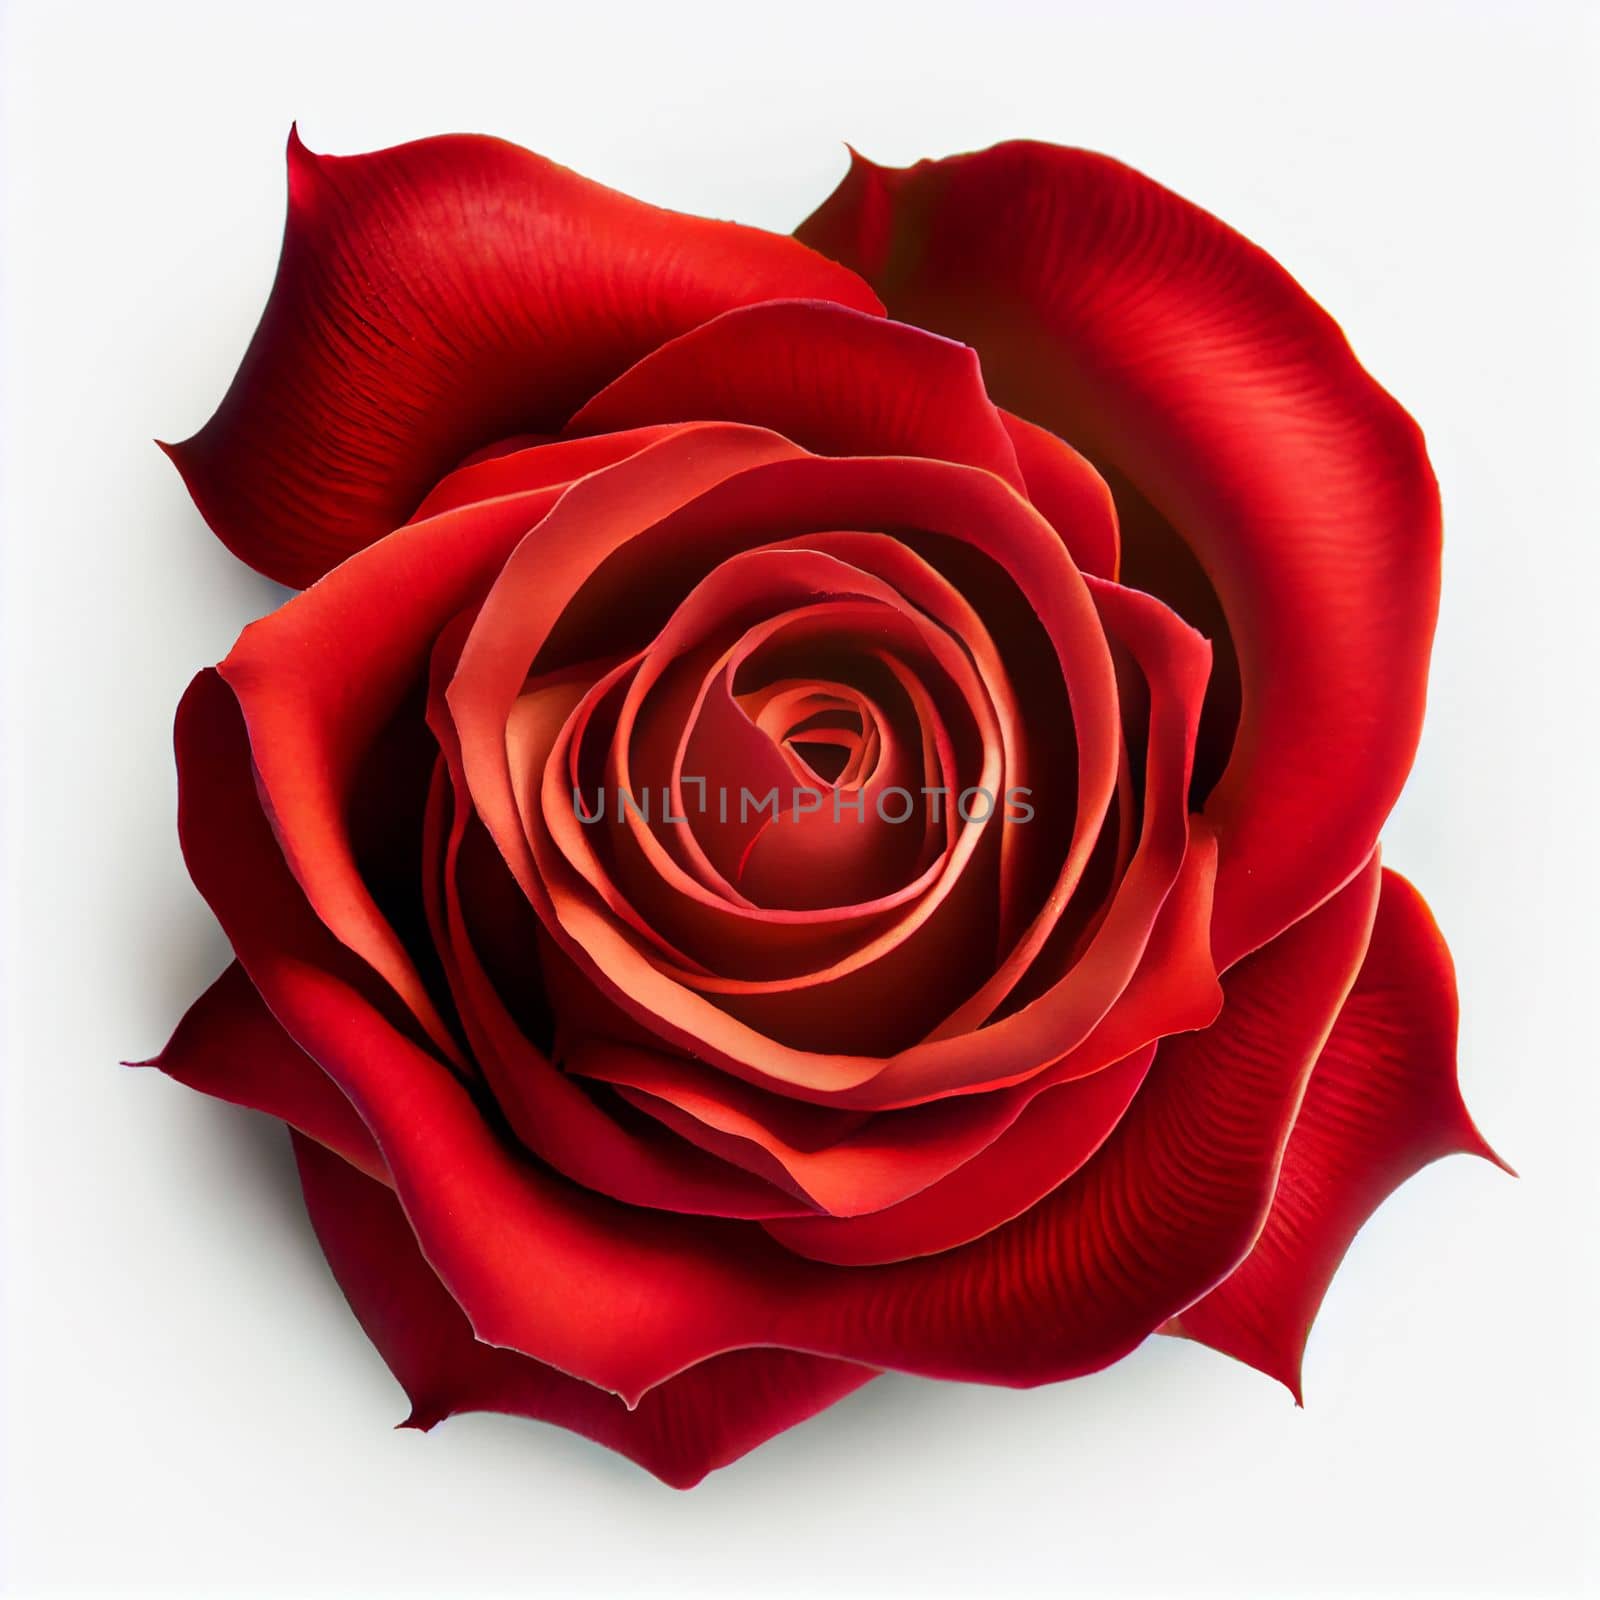 Top view of a red rose on a white background, perfect for representing the theme of Valentine's Day.